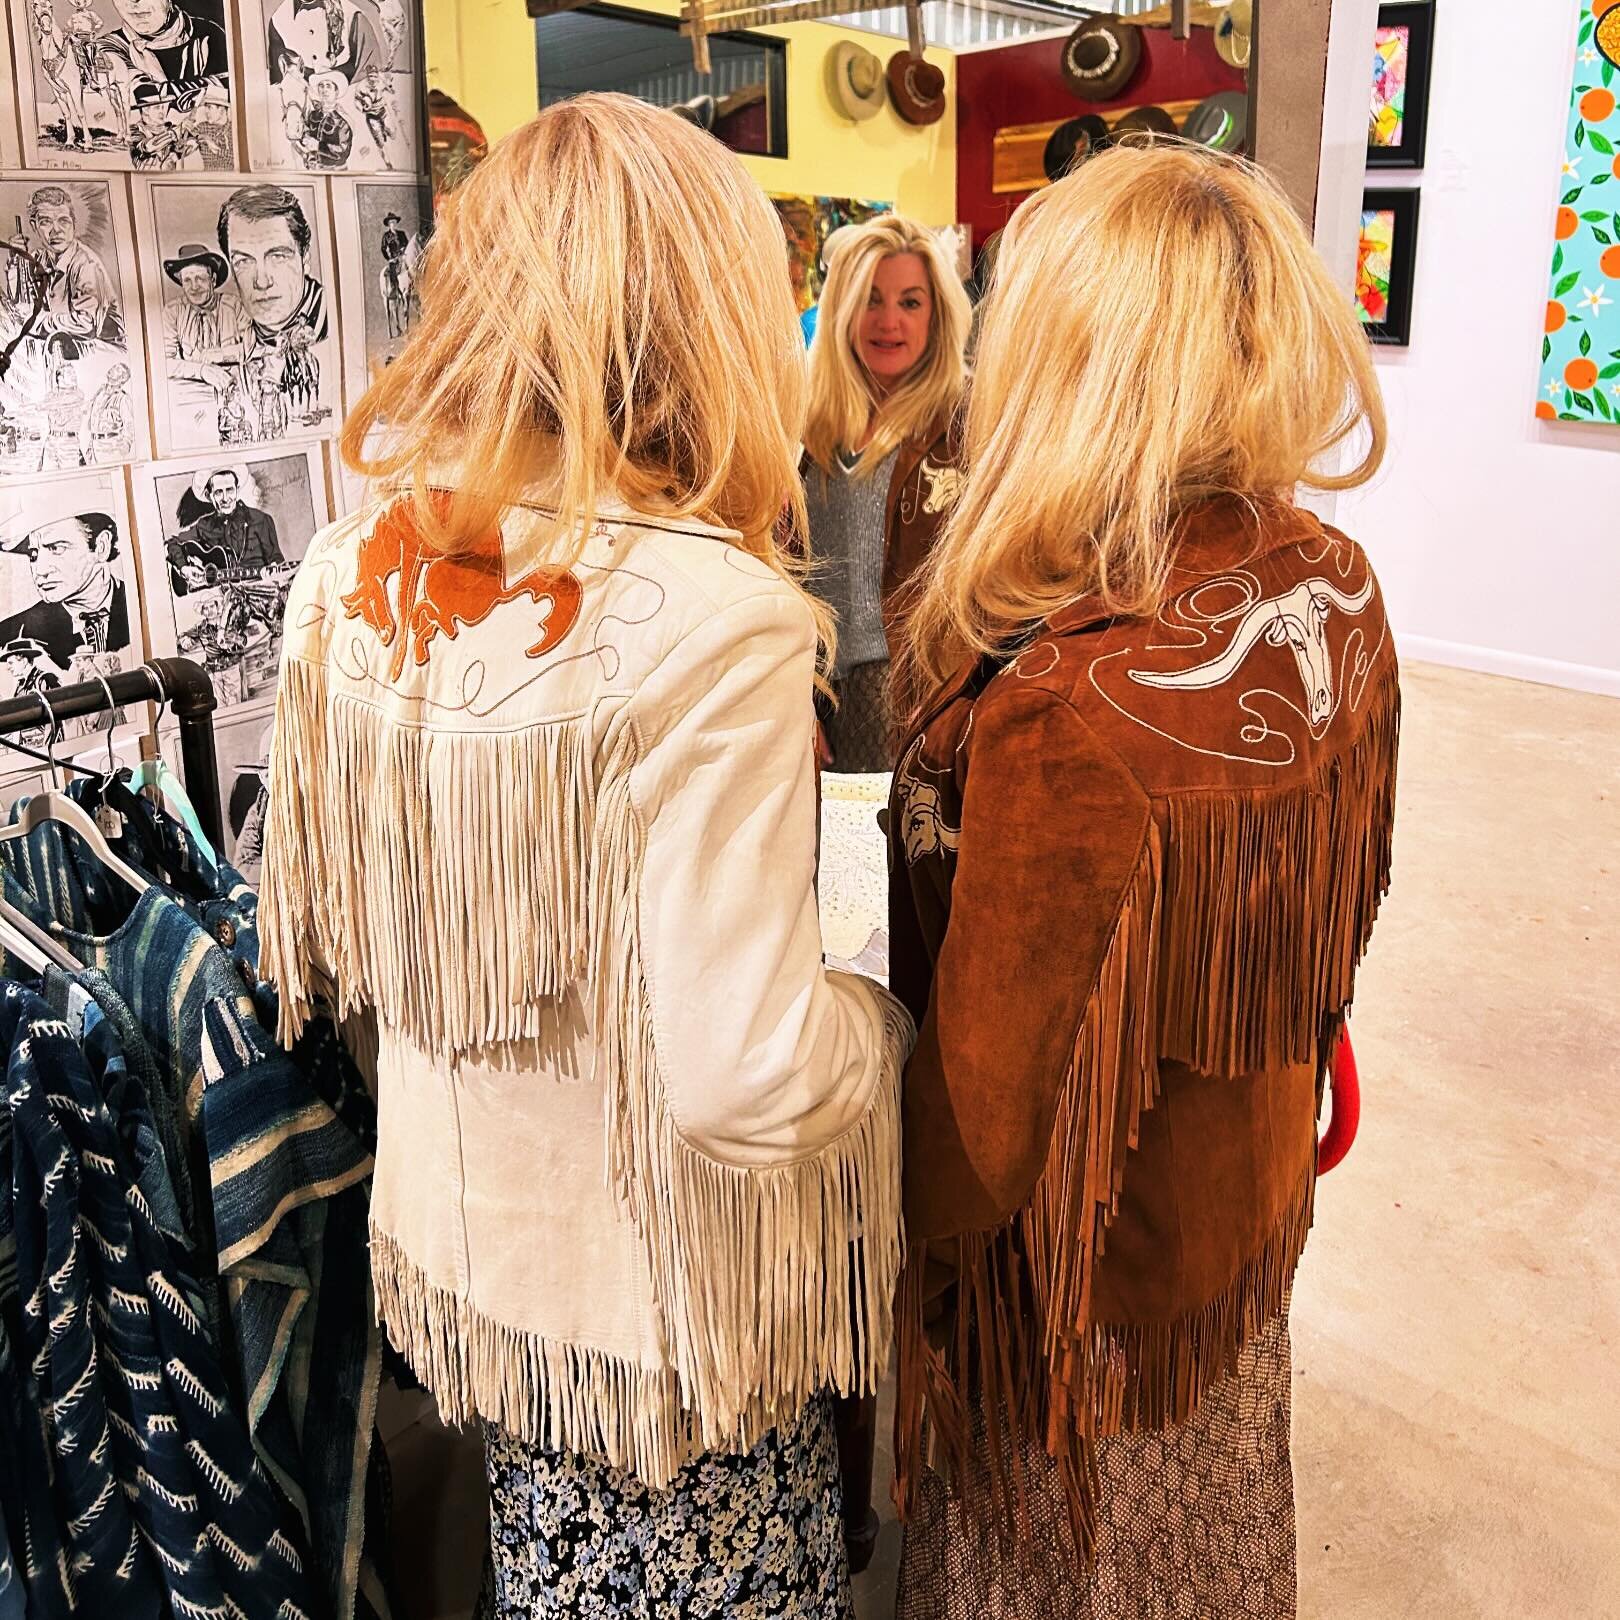 Twins in Fringe! #sold THANKS to all of the great new friends and customers we have met so far in Texas. TODAY @squirrelsgonewild &amp; @lonesomepinecone are OPEN for business at our @pioneerhouse Pop Up in Round Top, TX. Come see us. 
❤️😊❤️ @550vin